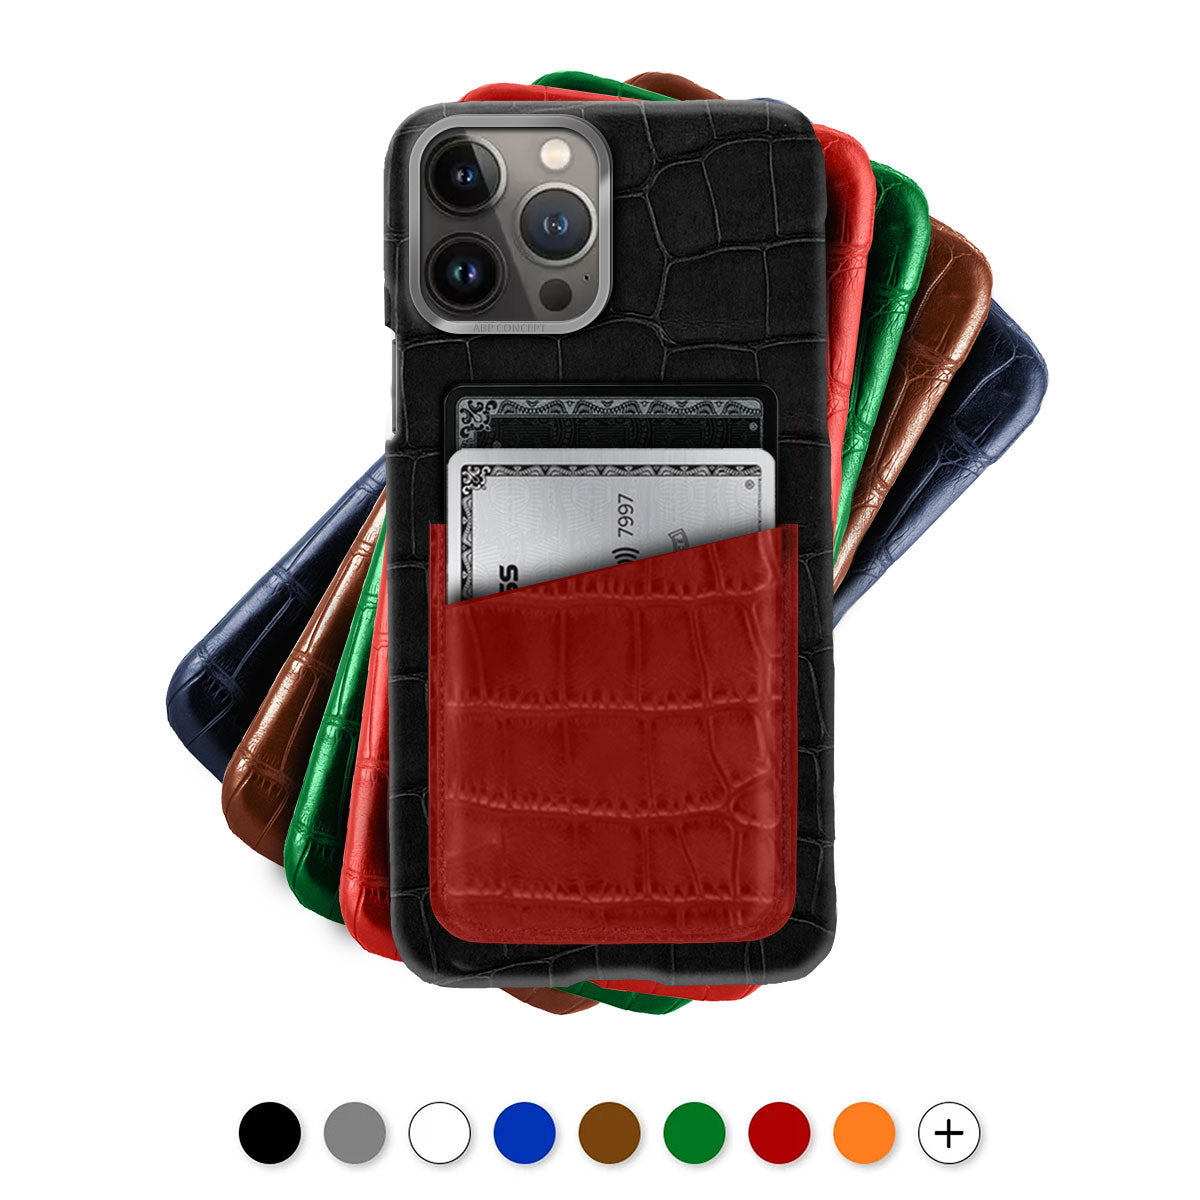 Leather iPhone "Card case" / cover with credit card pocket - iPhone 13 ( Pro / Max ) - Genuine alligator